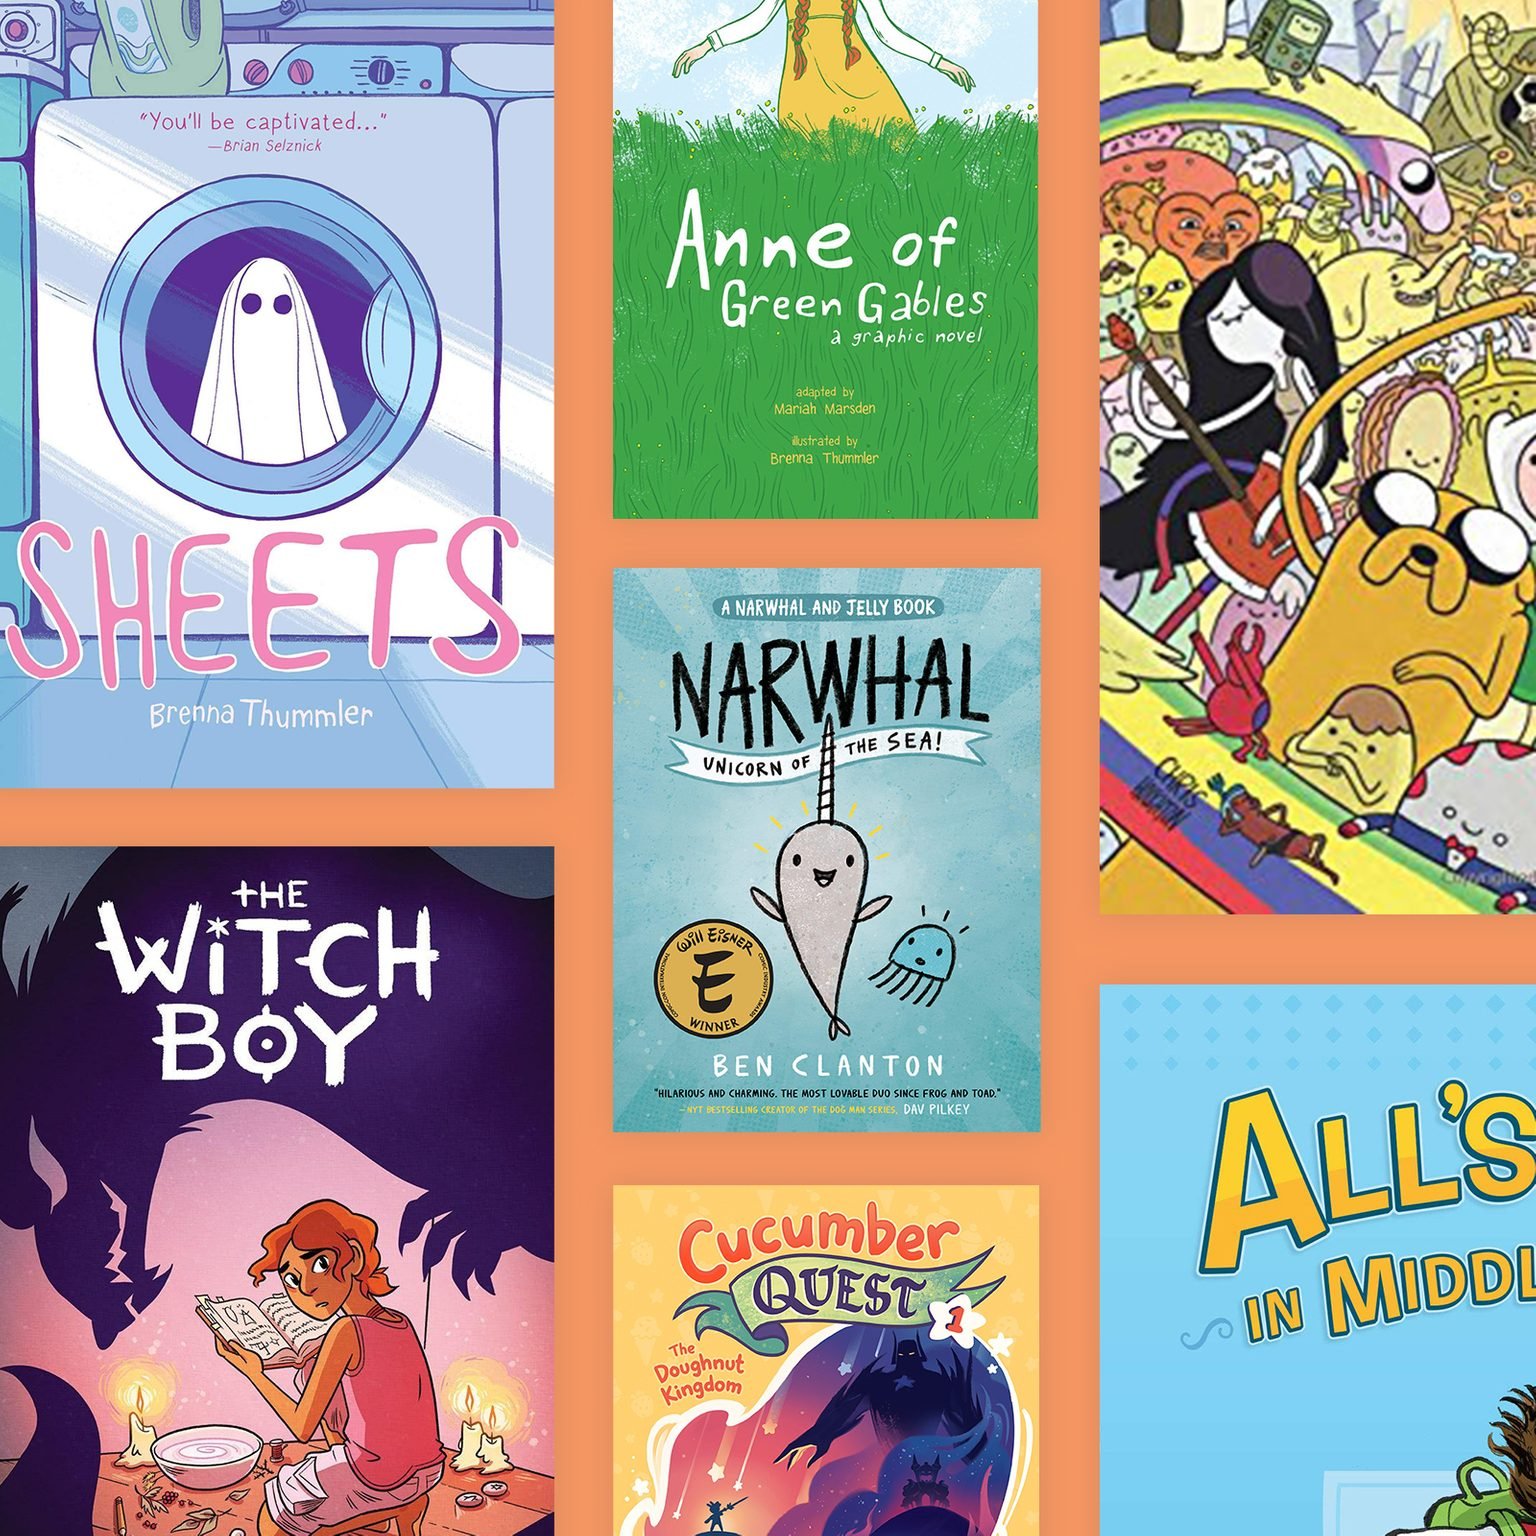 25 Graphic Novels for Kids Illustrated Books They'll Love Reading